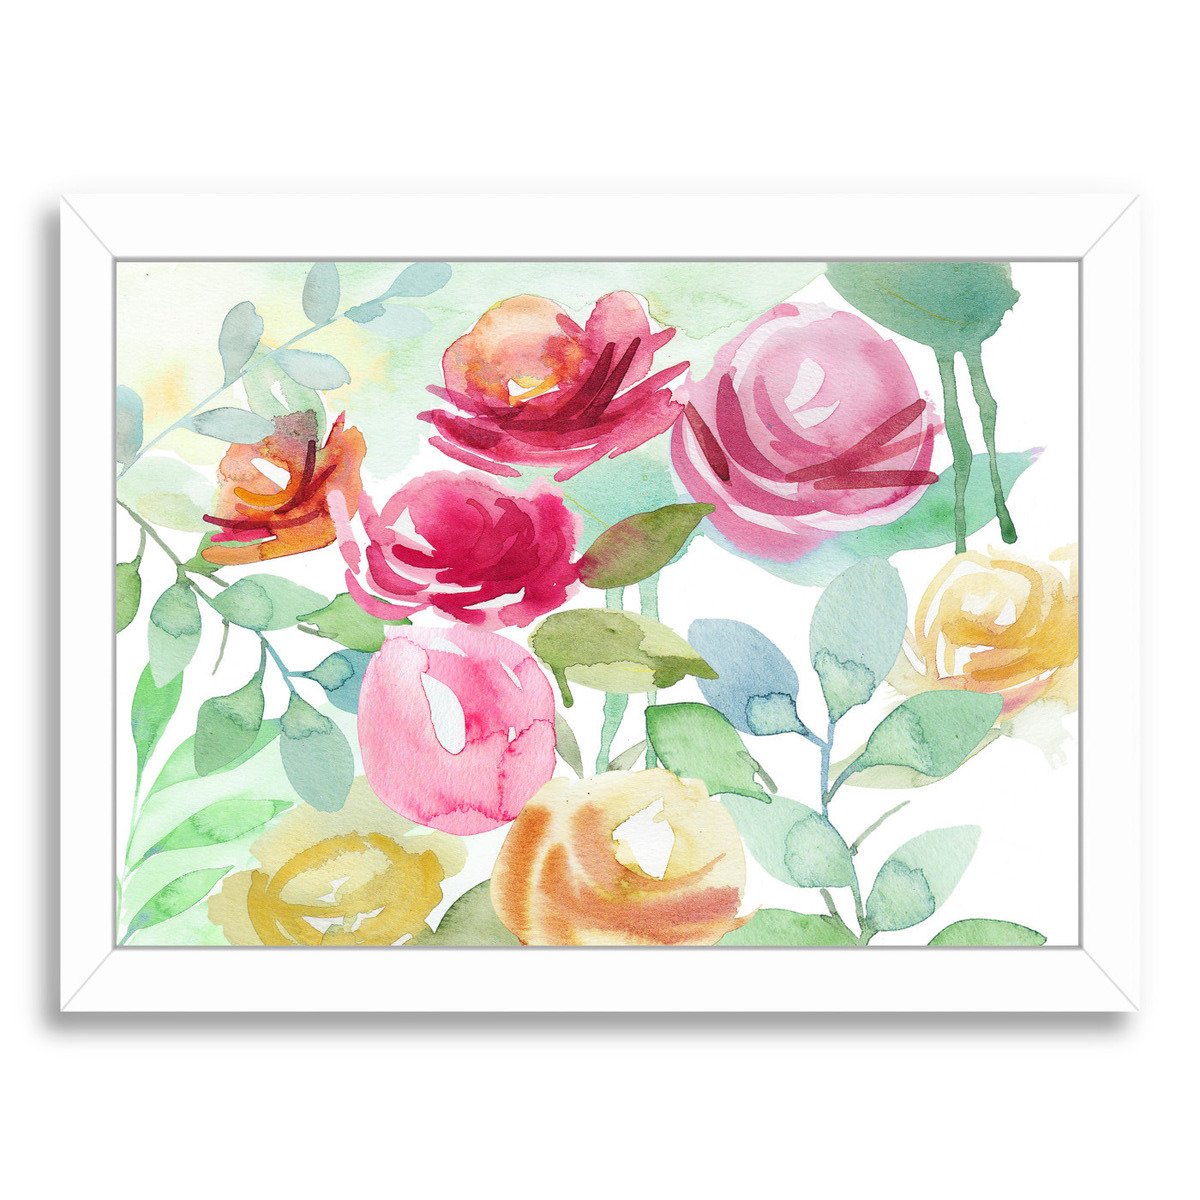 Floral Watercolor By Victoria Nelson - Framed Print - Americanflat